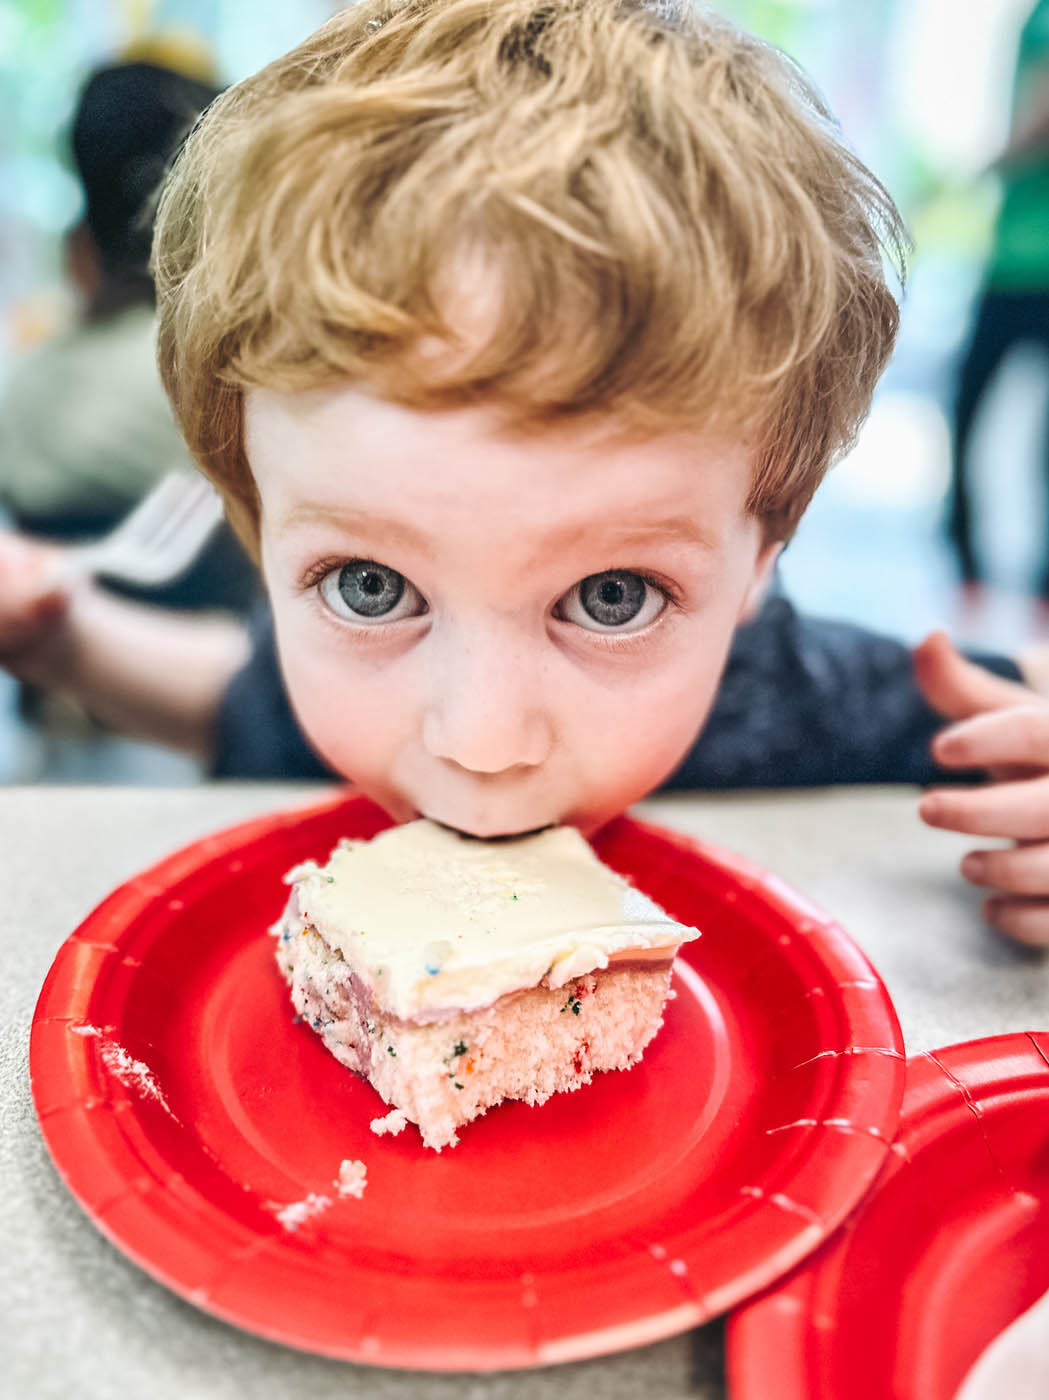 A kid taking a big bite out of a cake piece at Romp n' Roll - a children's party place in Charlotte, NC.